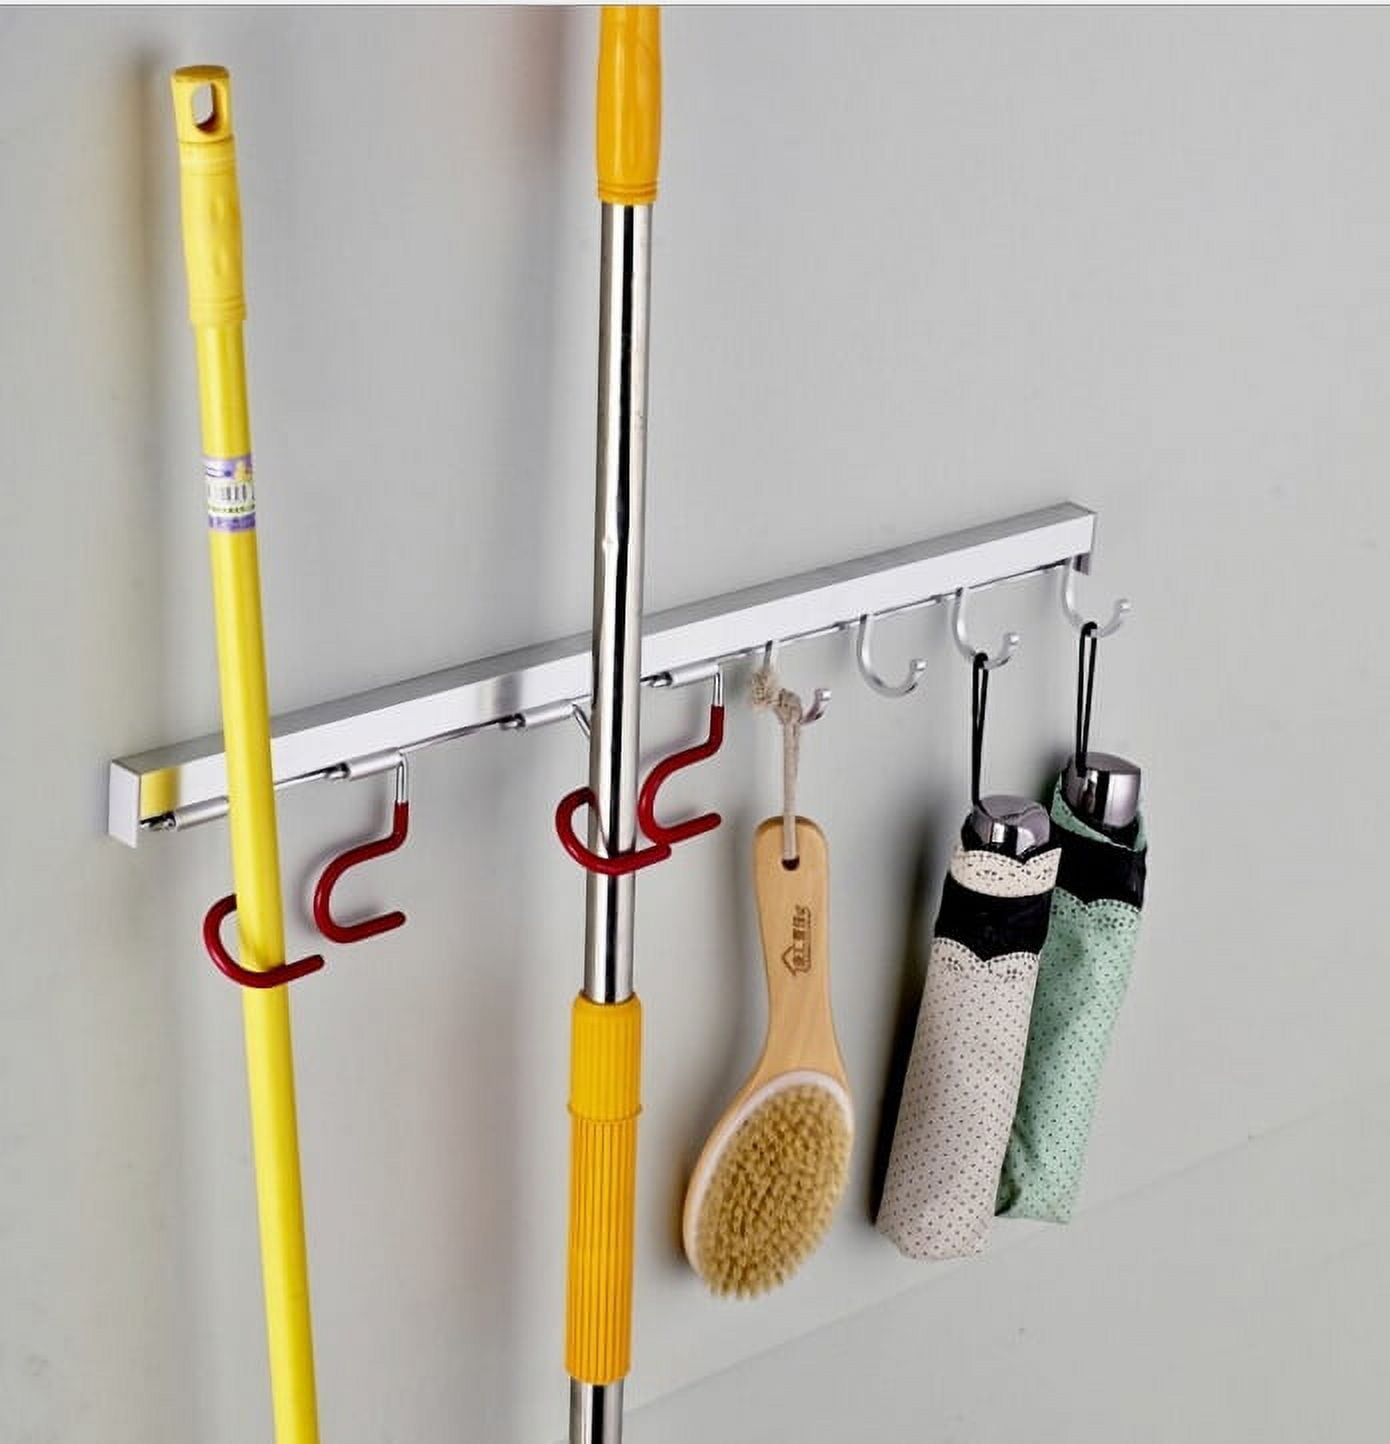 Mop Broom Holder Organizer, Wall Mounted Cleaning Tools Organizer,Space  Saver Rags Dusters Rakes Utility Hooks Holder for Kitchen Garage Office 